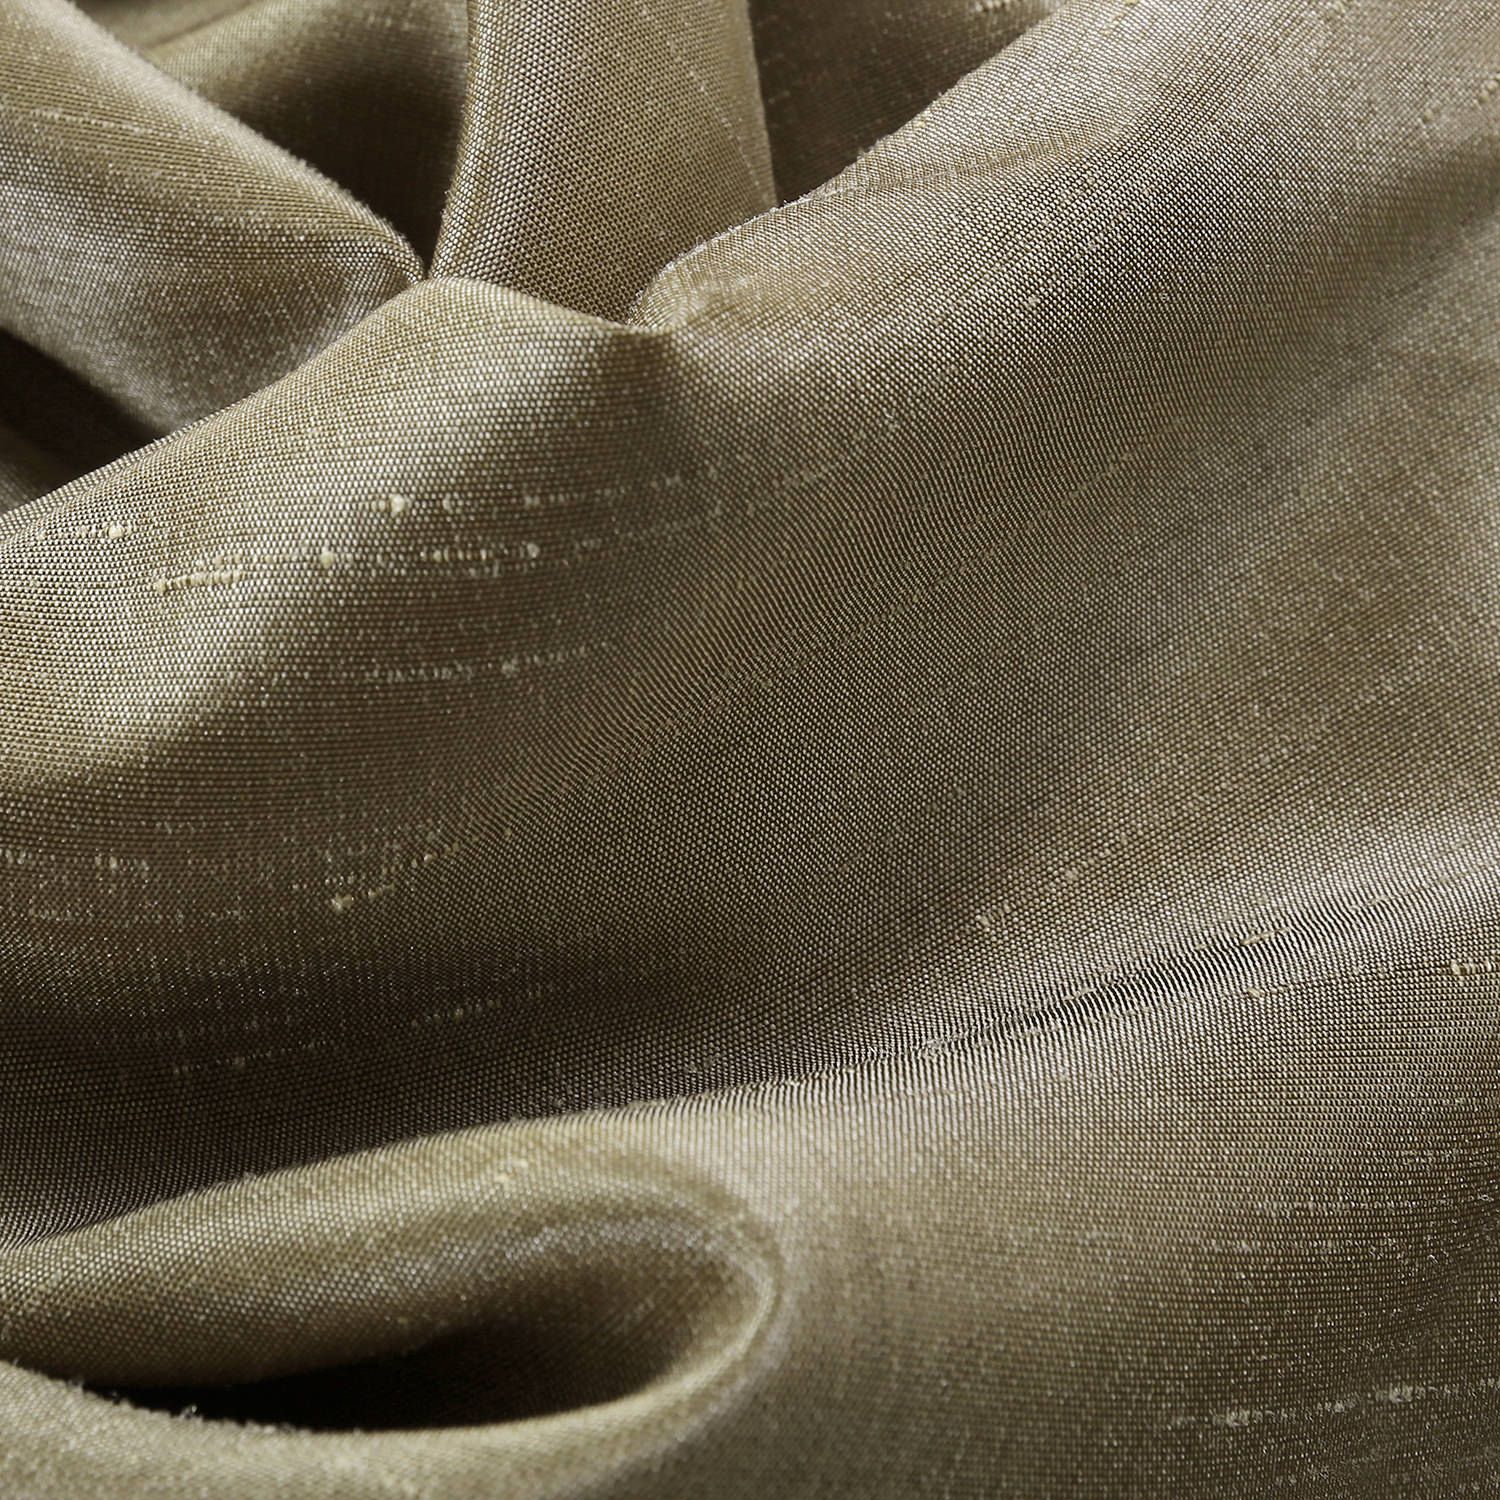 Warm Stone Vintage Textured Faux Dupioni Silk Fabric Regarding Vintage Textured Faux Dupioni Silk Curtain Panels (View 25 of 30)